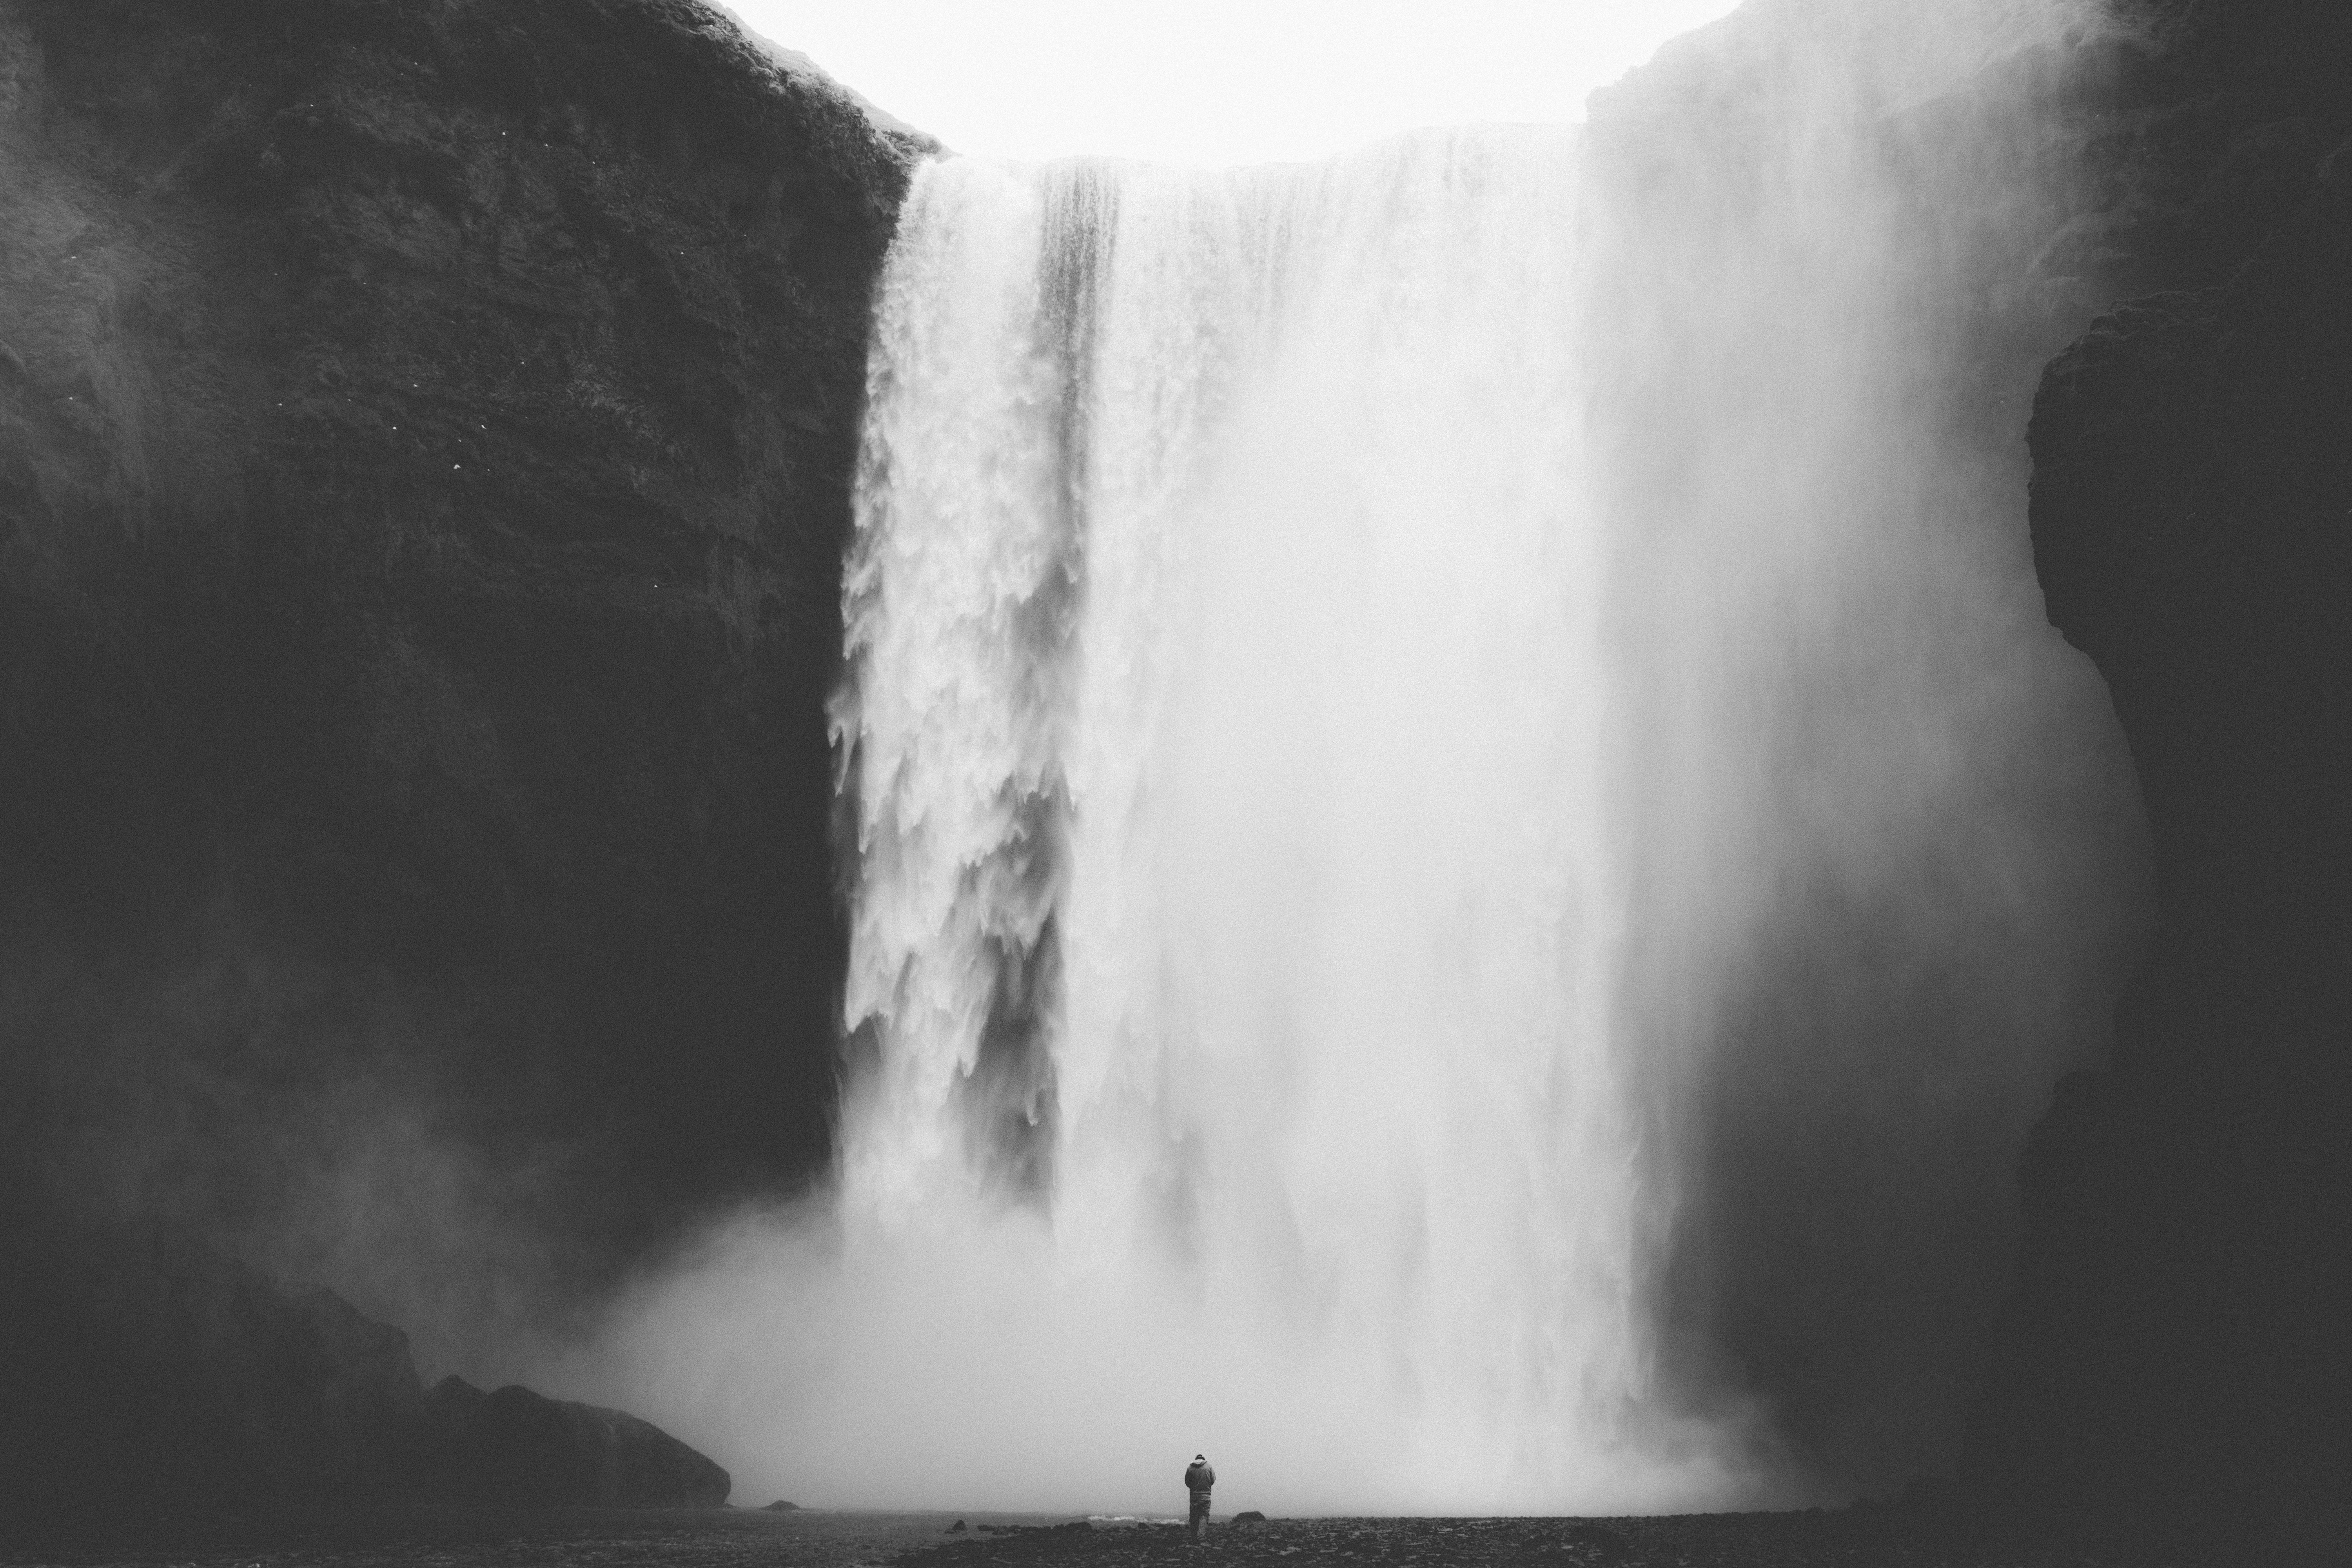 The Waterfall, Adventure, Alone, Fall, Iceland, HQ Photo